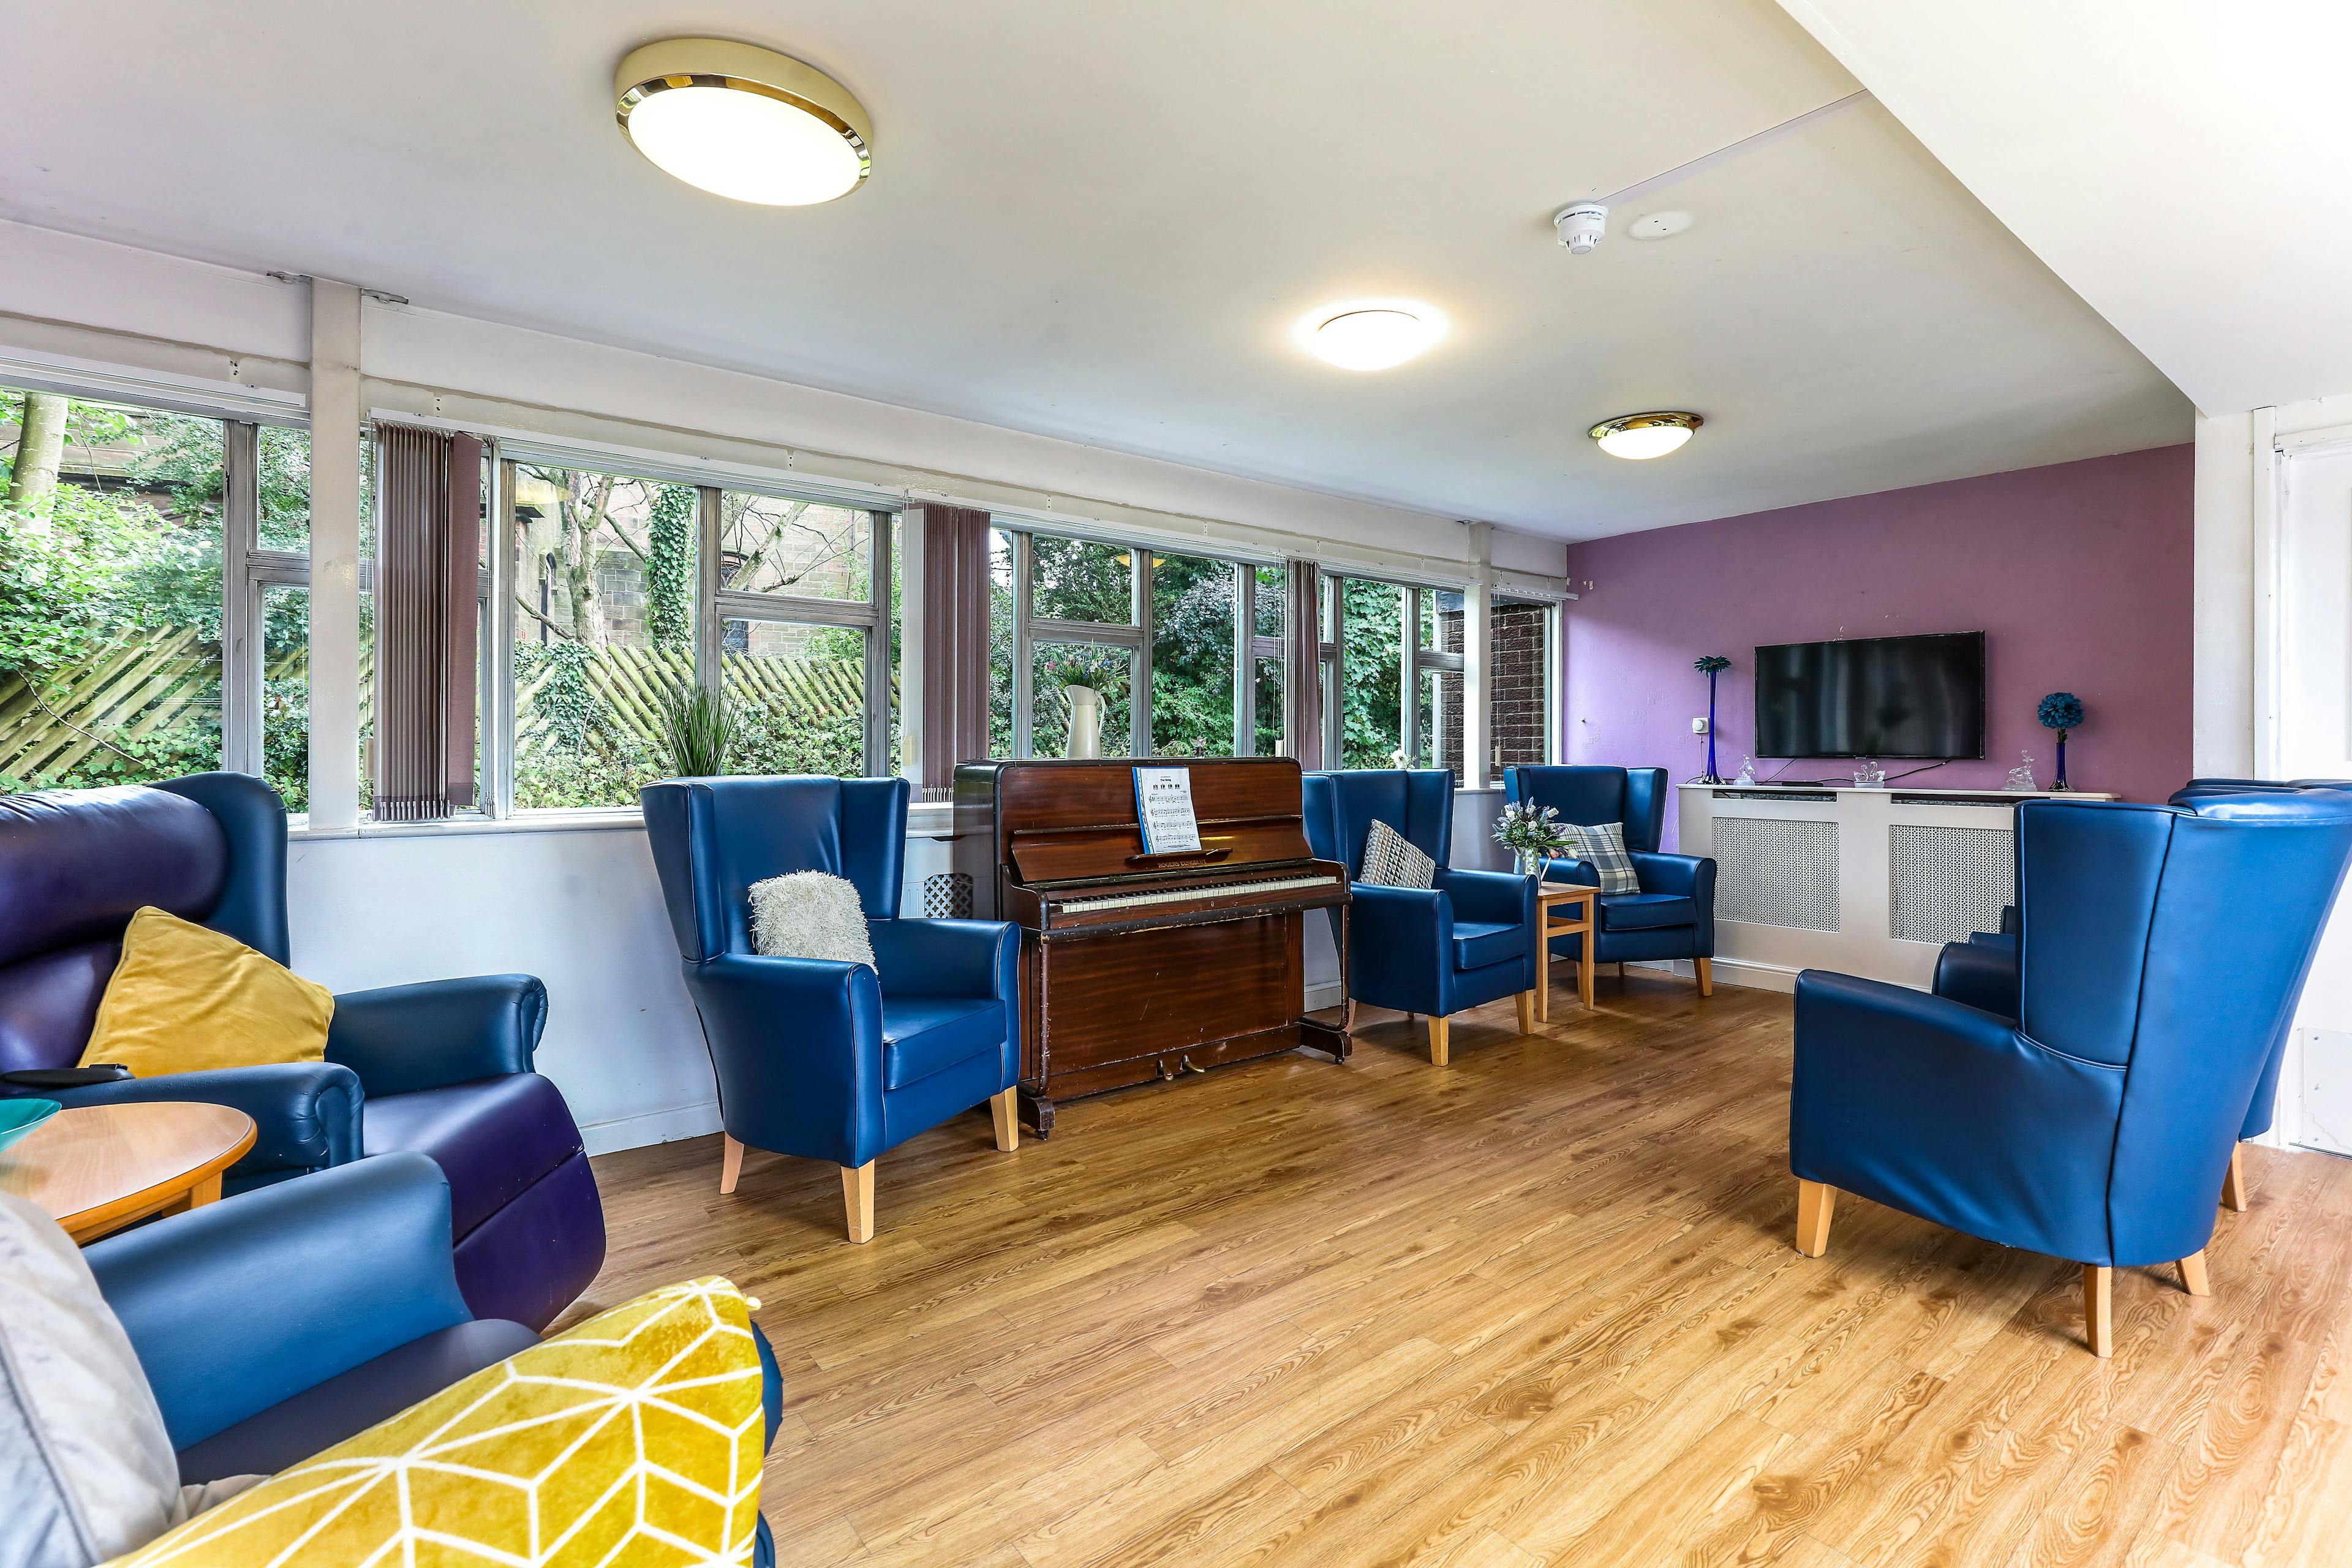 Ancliffe care home